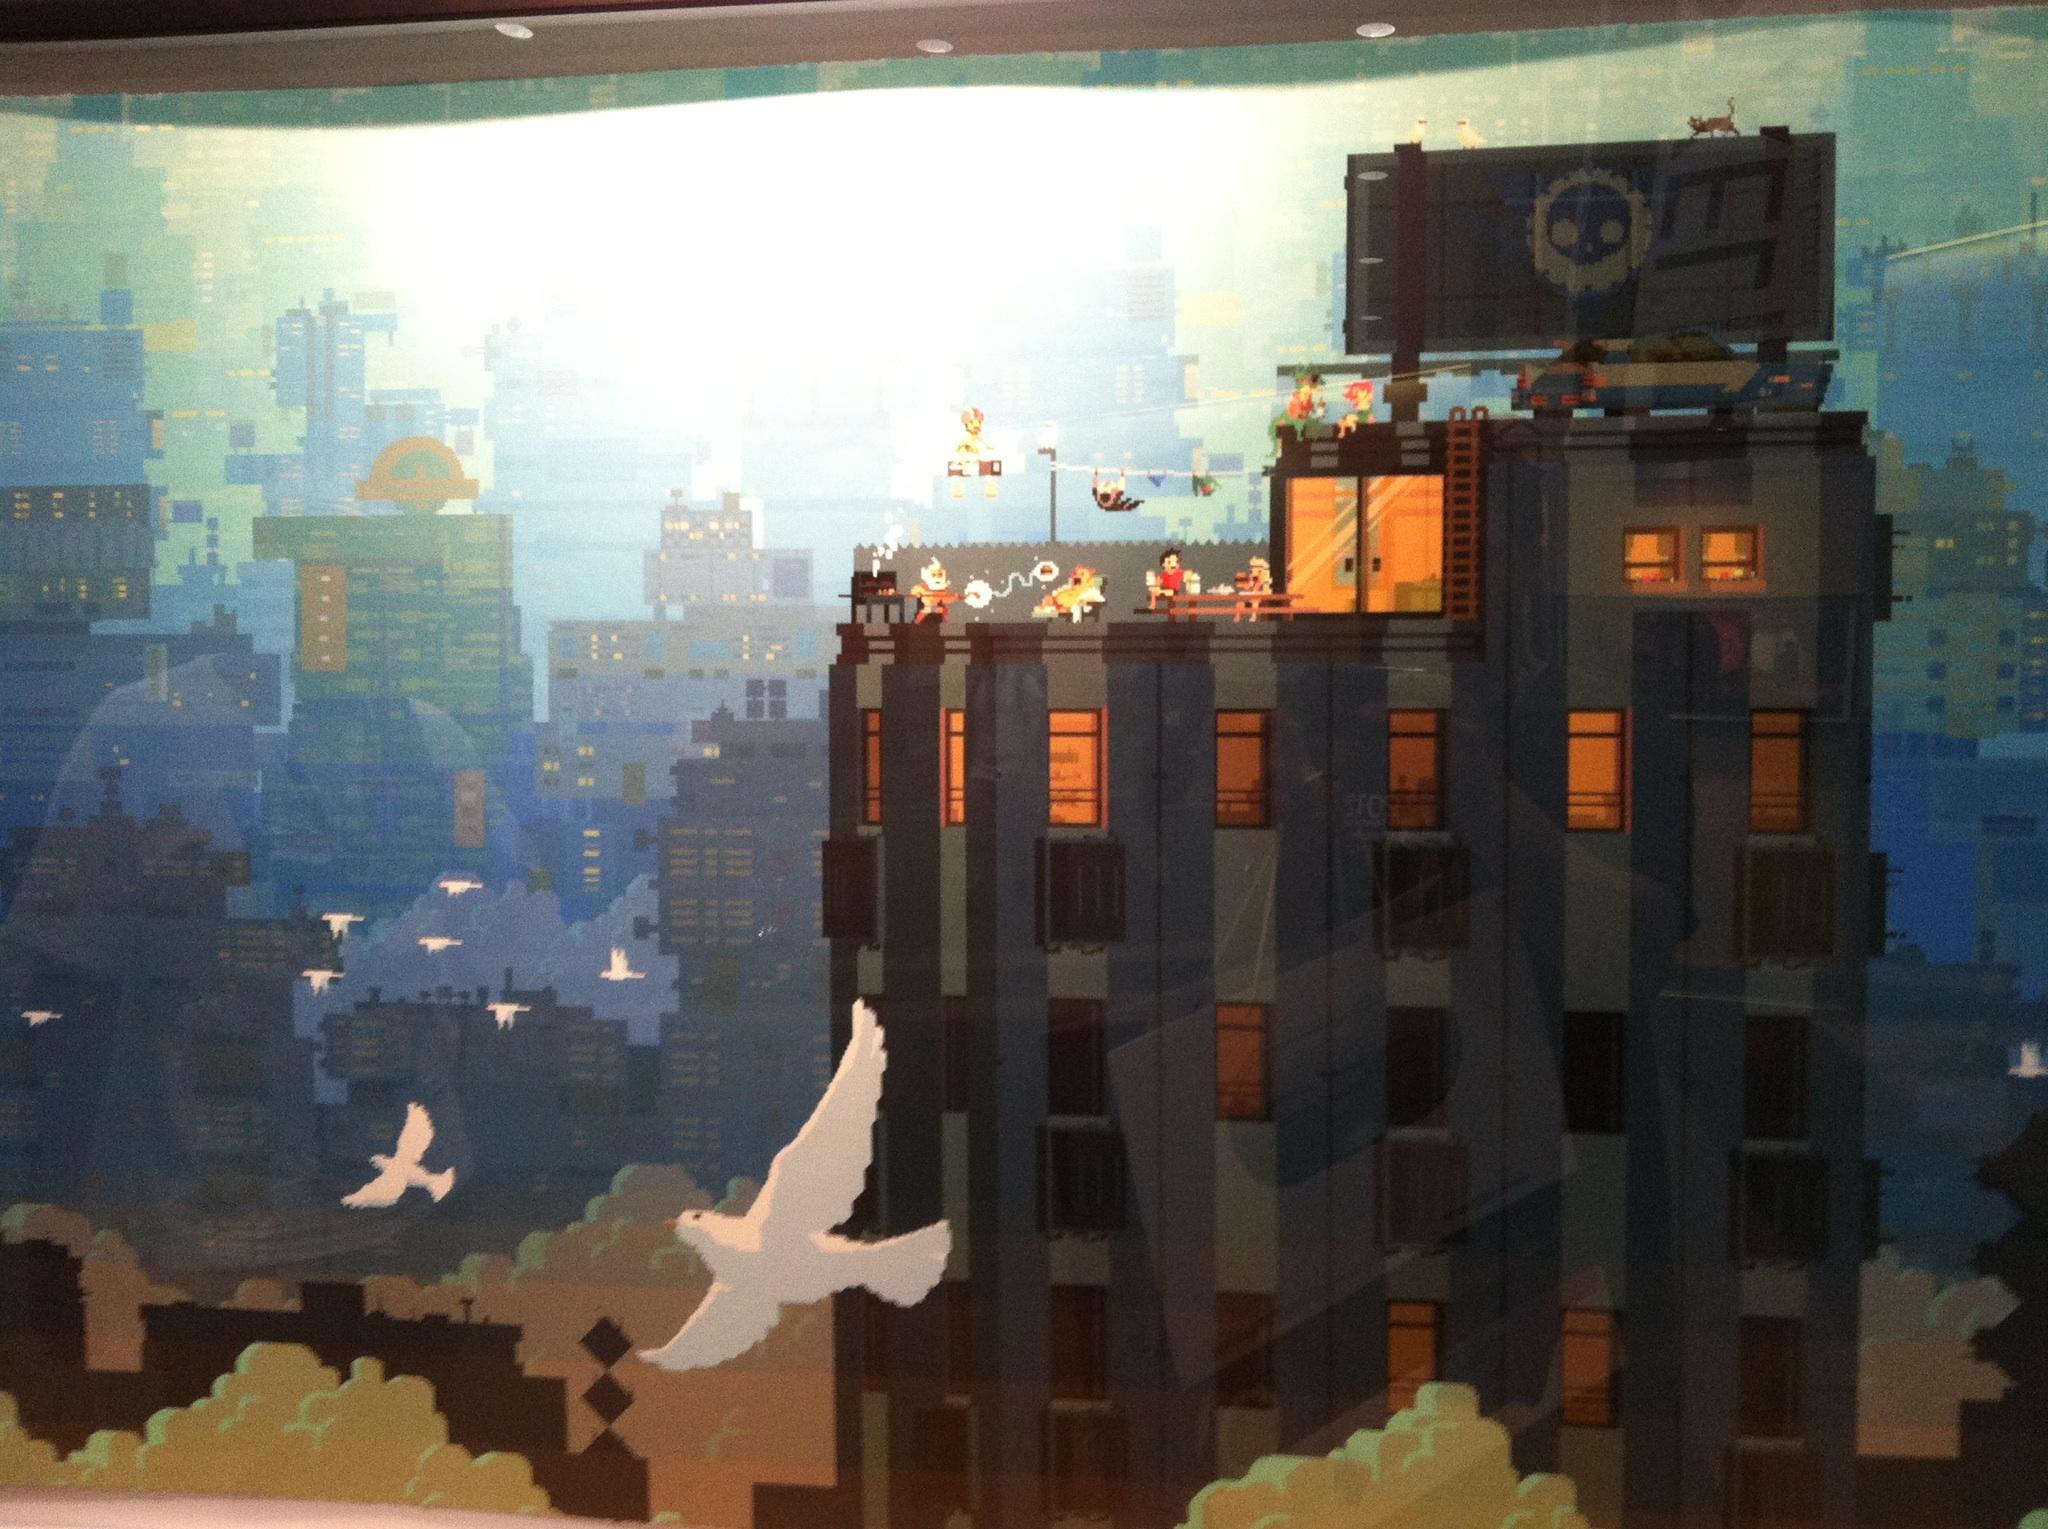 HD desktop wallpaper featuring a stylized building from the game Transistor with a pixel-art cityscape background and birds in flight.